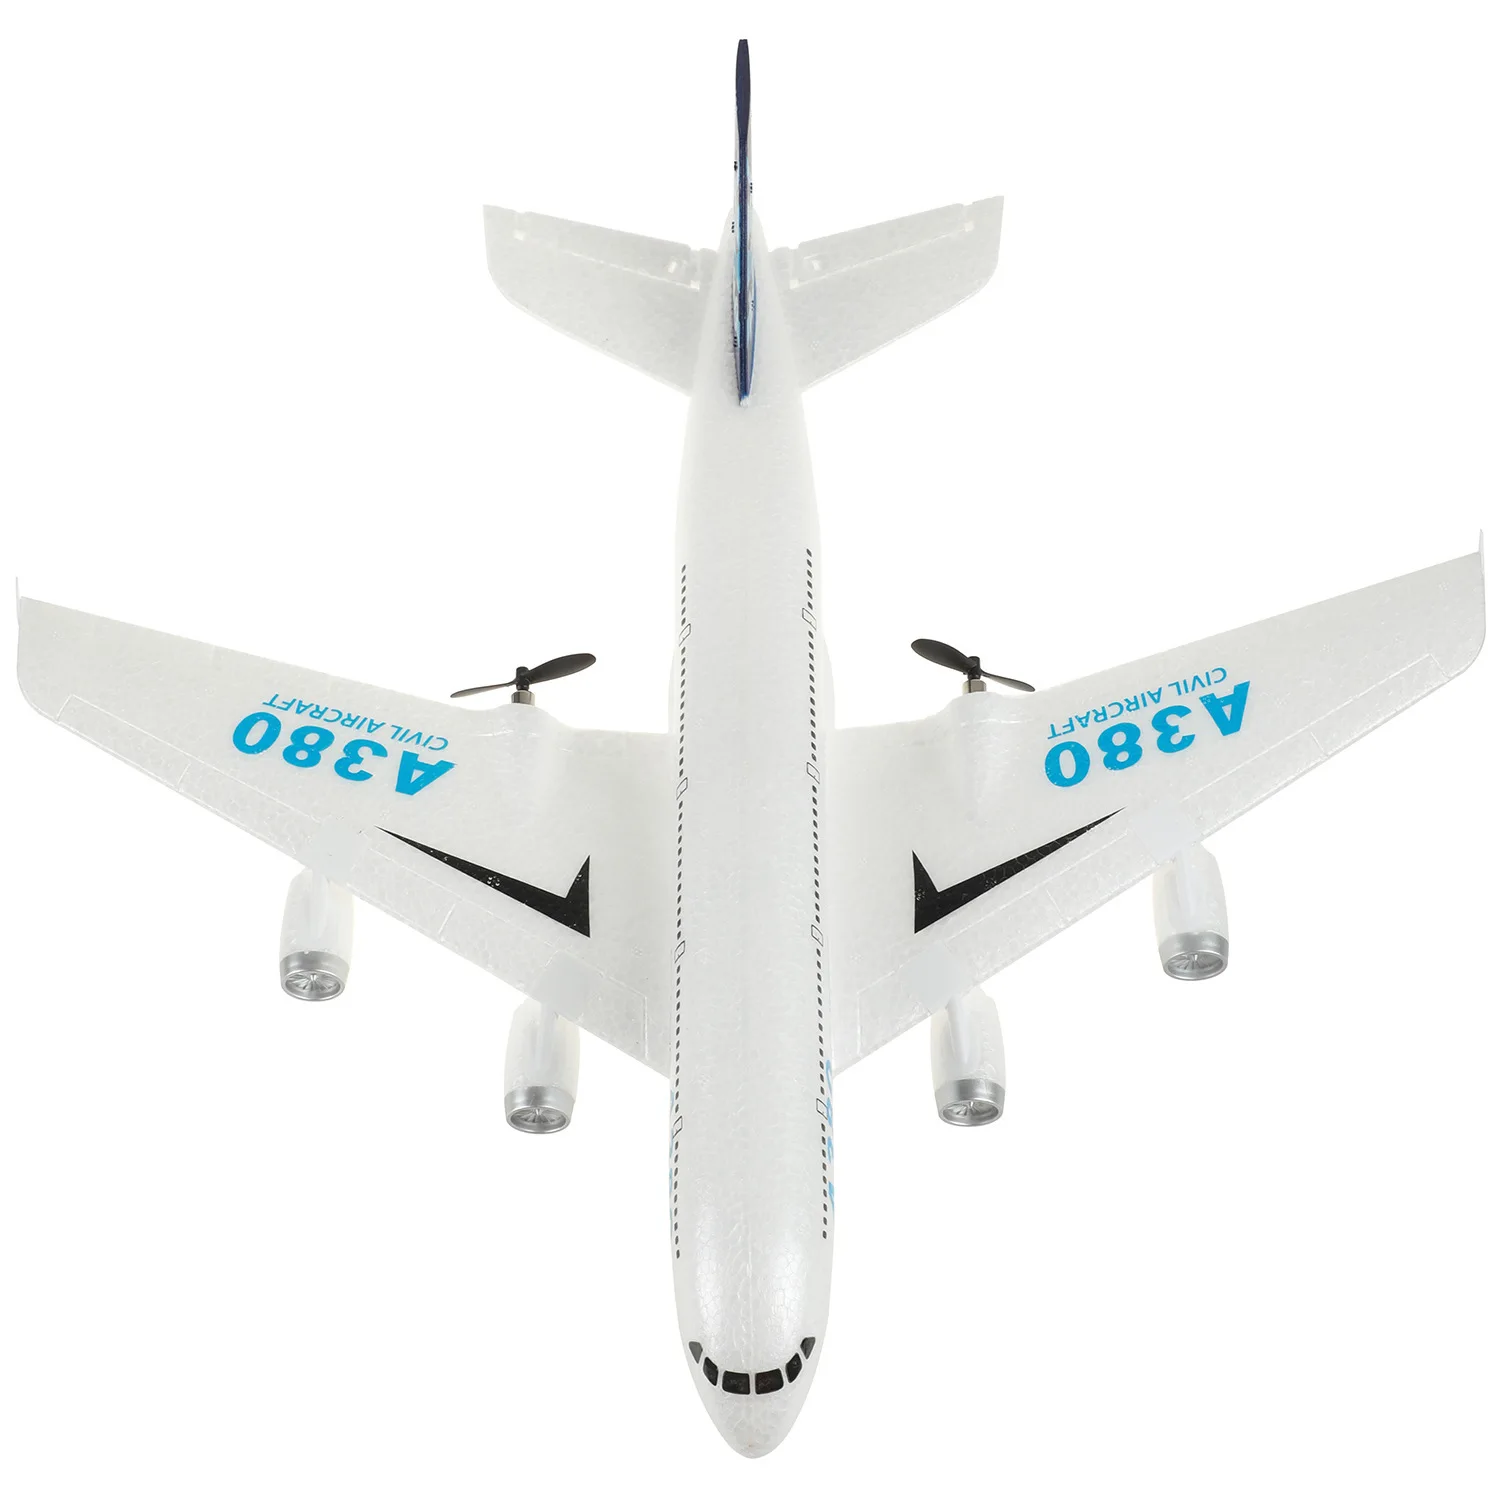 New Jet Airplane Airbus A380 Airplane Toys 2.4G  RC Airplane Fixed Wing Plane Outdoor Toys Drone P520 RC Plane Toy Children Gift enlarge